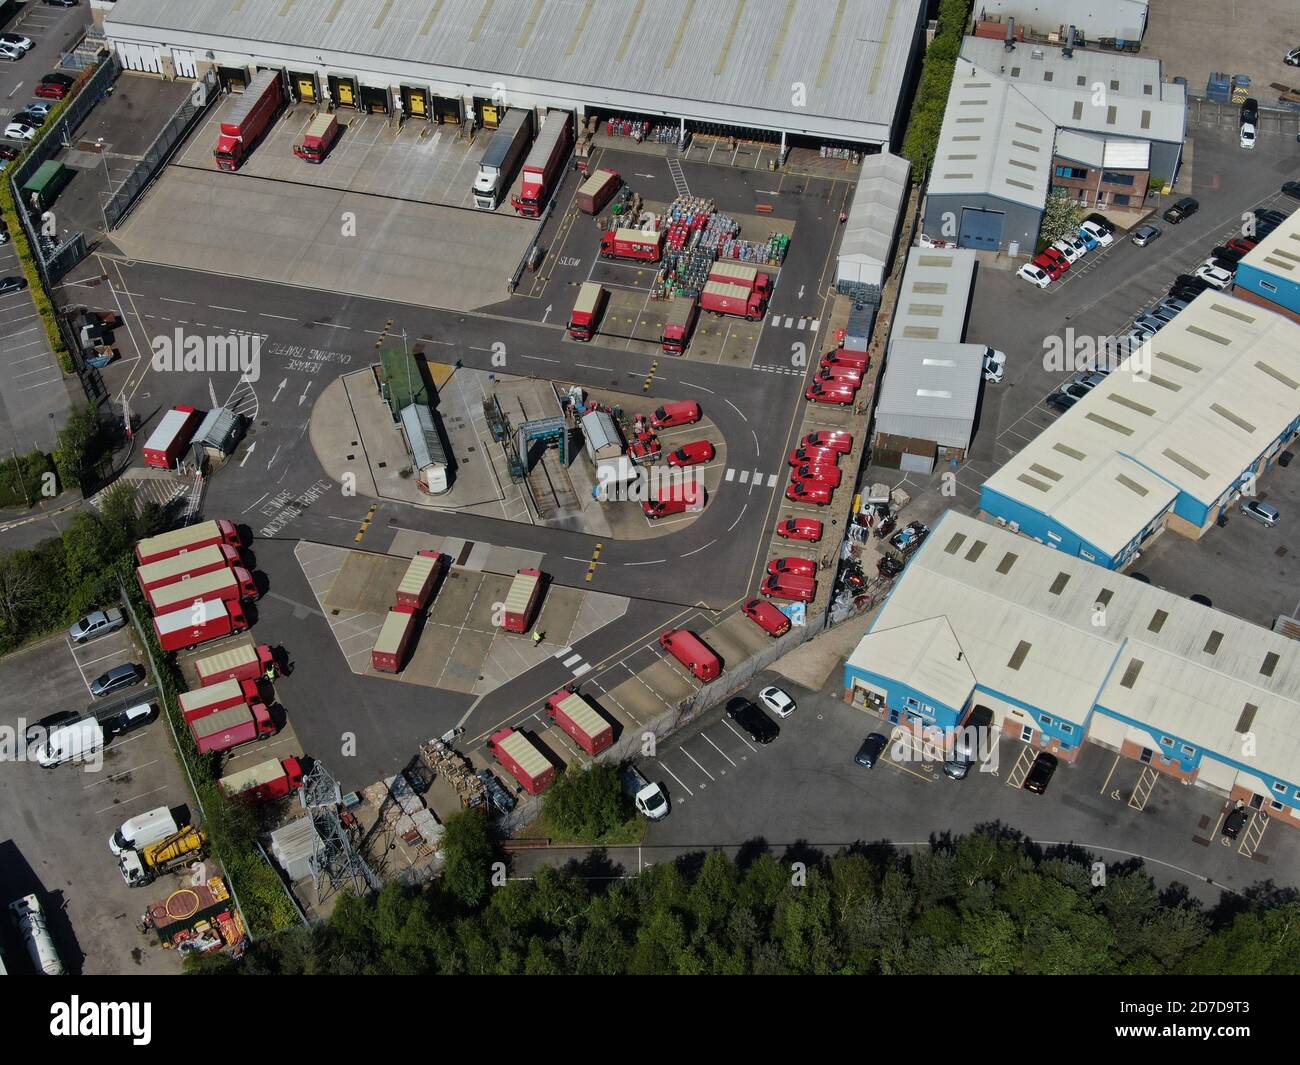 aerial view of Royal Mail sorting depot with lorries and sorting depot Stock Photo